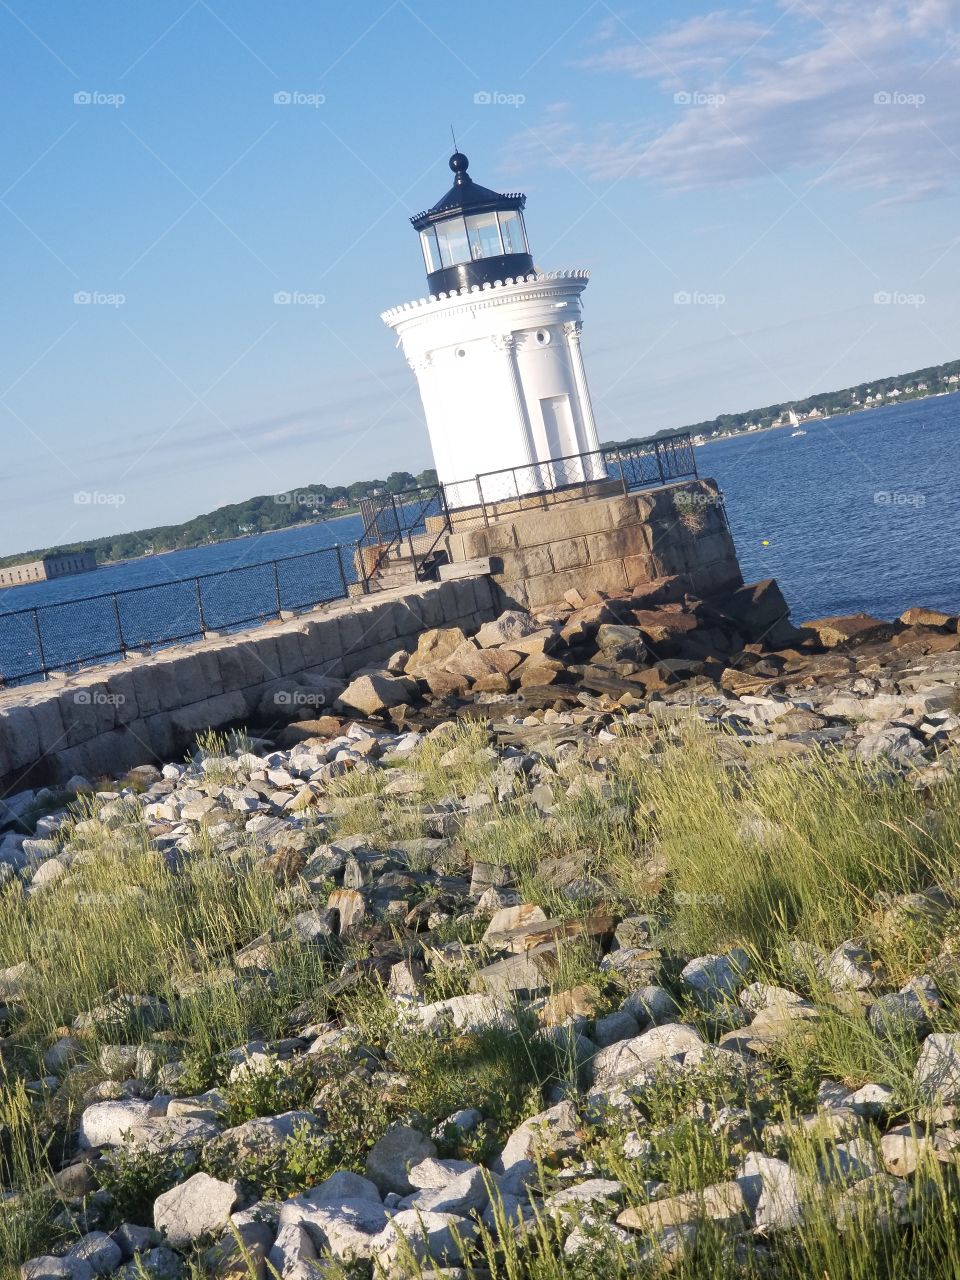 I know I post so many photos of this amazing lighthouse at Bug Light Park in South Portland,  ME,  but it's one of my favorite places in the world.